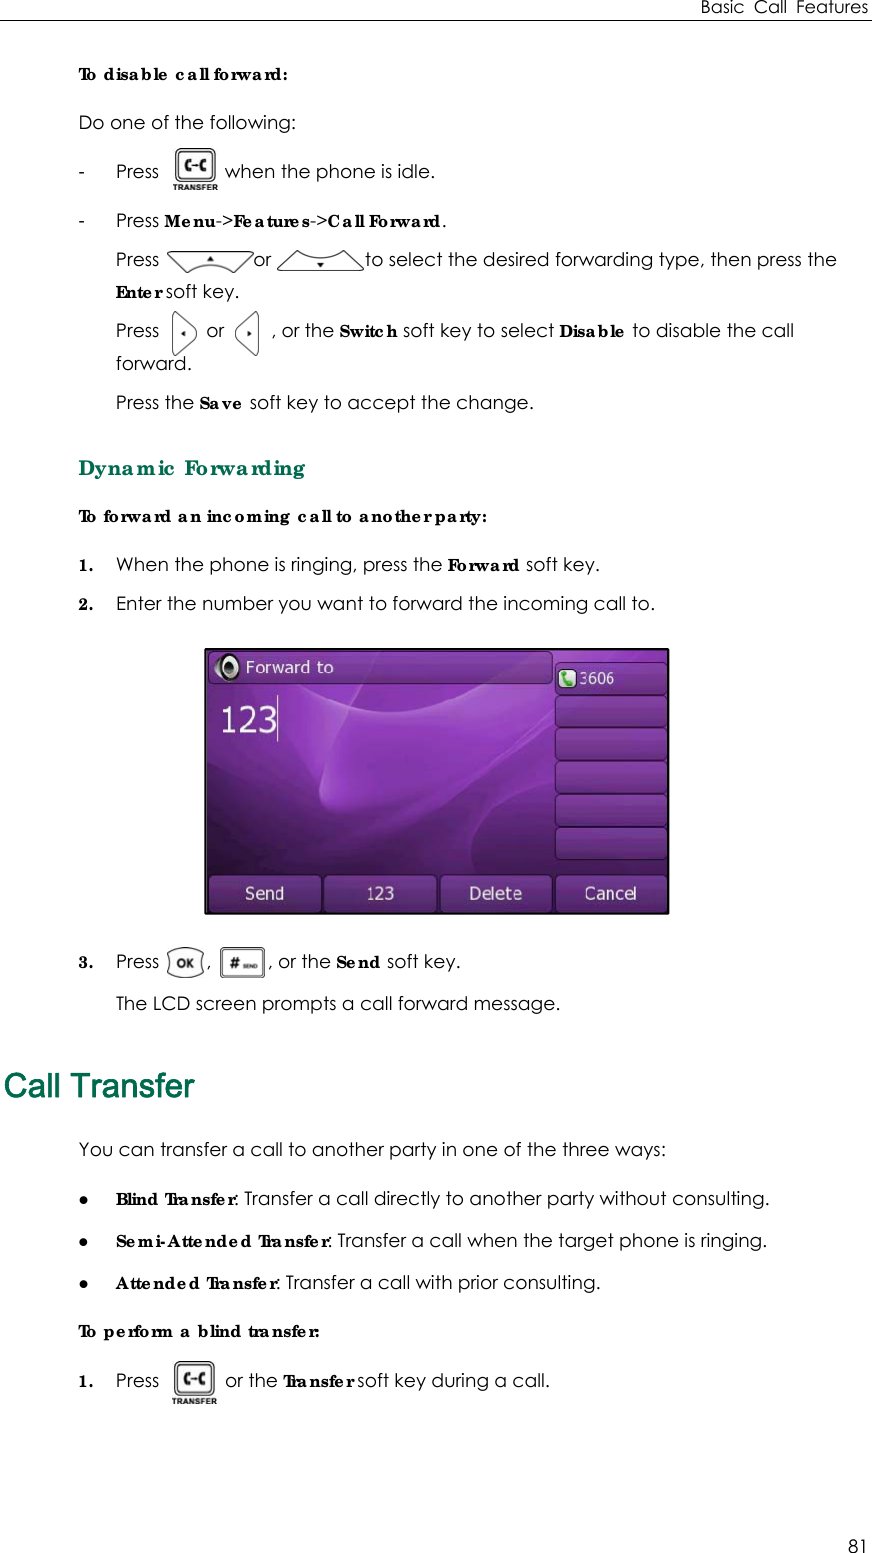 Basic Call Features 81 To disable call forward: Do one of the following: - Press       when the phone is idle. - Press Menu-&gt;Features-&gt;Call Forward. Press          or          to select the desired forwarding type, then press the Enter soft key. Press     or     , or the Switch soft key to select Disable to disable the call forward. Press the Save soft key to accept the change. Dynamic Forwarding To forward an incoming call to another party:   1. When the phone is ringing, press the Forward soft key. 2. Enter the number you want to forward the incoming call to.  3. Press     ,      , or the Send soft key. The LCD screen prompts a call forward message. Call Transfer You can transfer a call to another party in one of the three ways: z Blind Transfer: Transfer a call directly to another party without consulting. z Semi-Attended Transfer: Transfer a call when the target phone is ringing. z Attended Transfer: Transfer a call with prior consulting. To perform a blind transfer: 1. Press       or the Transfer soft key during a call.   